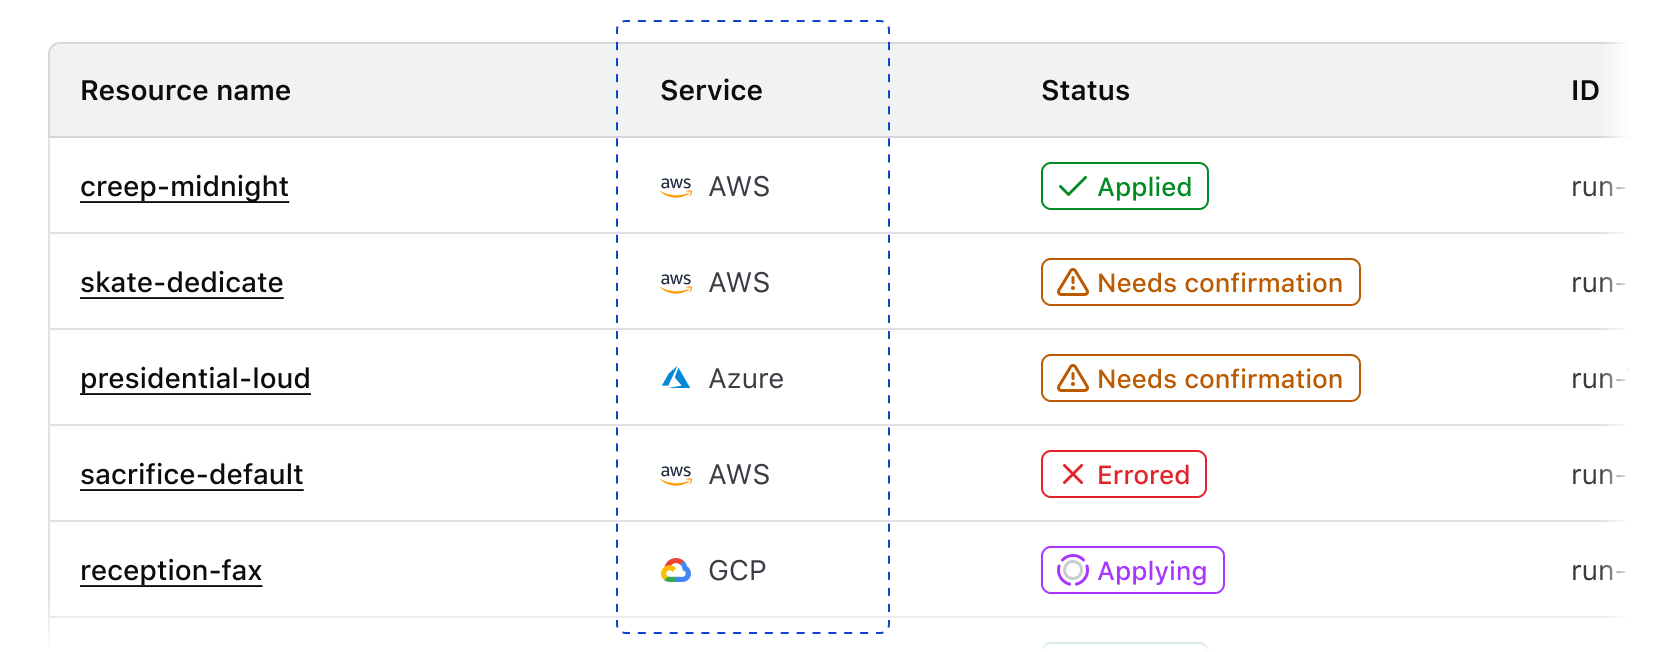 Service icon within a table